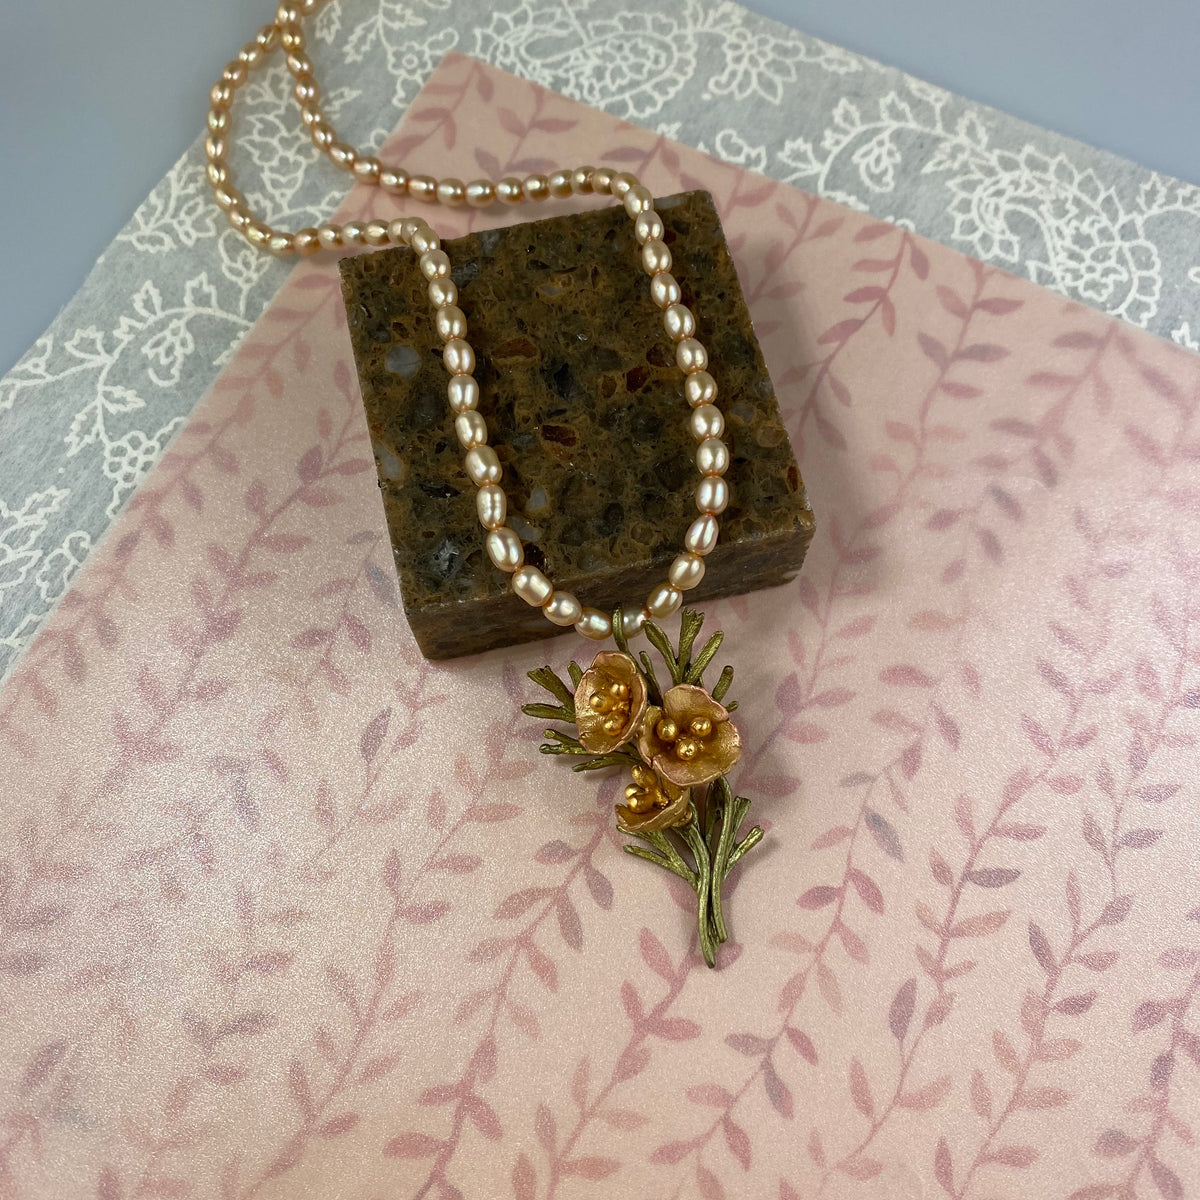 California Poppy Pendant on Pearls - Heart of the Home PA